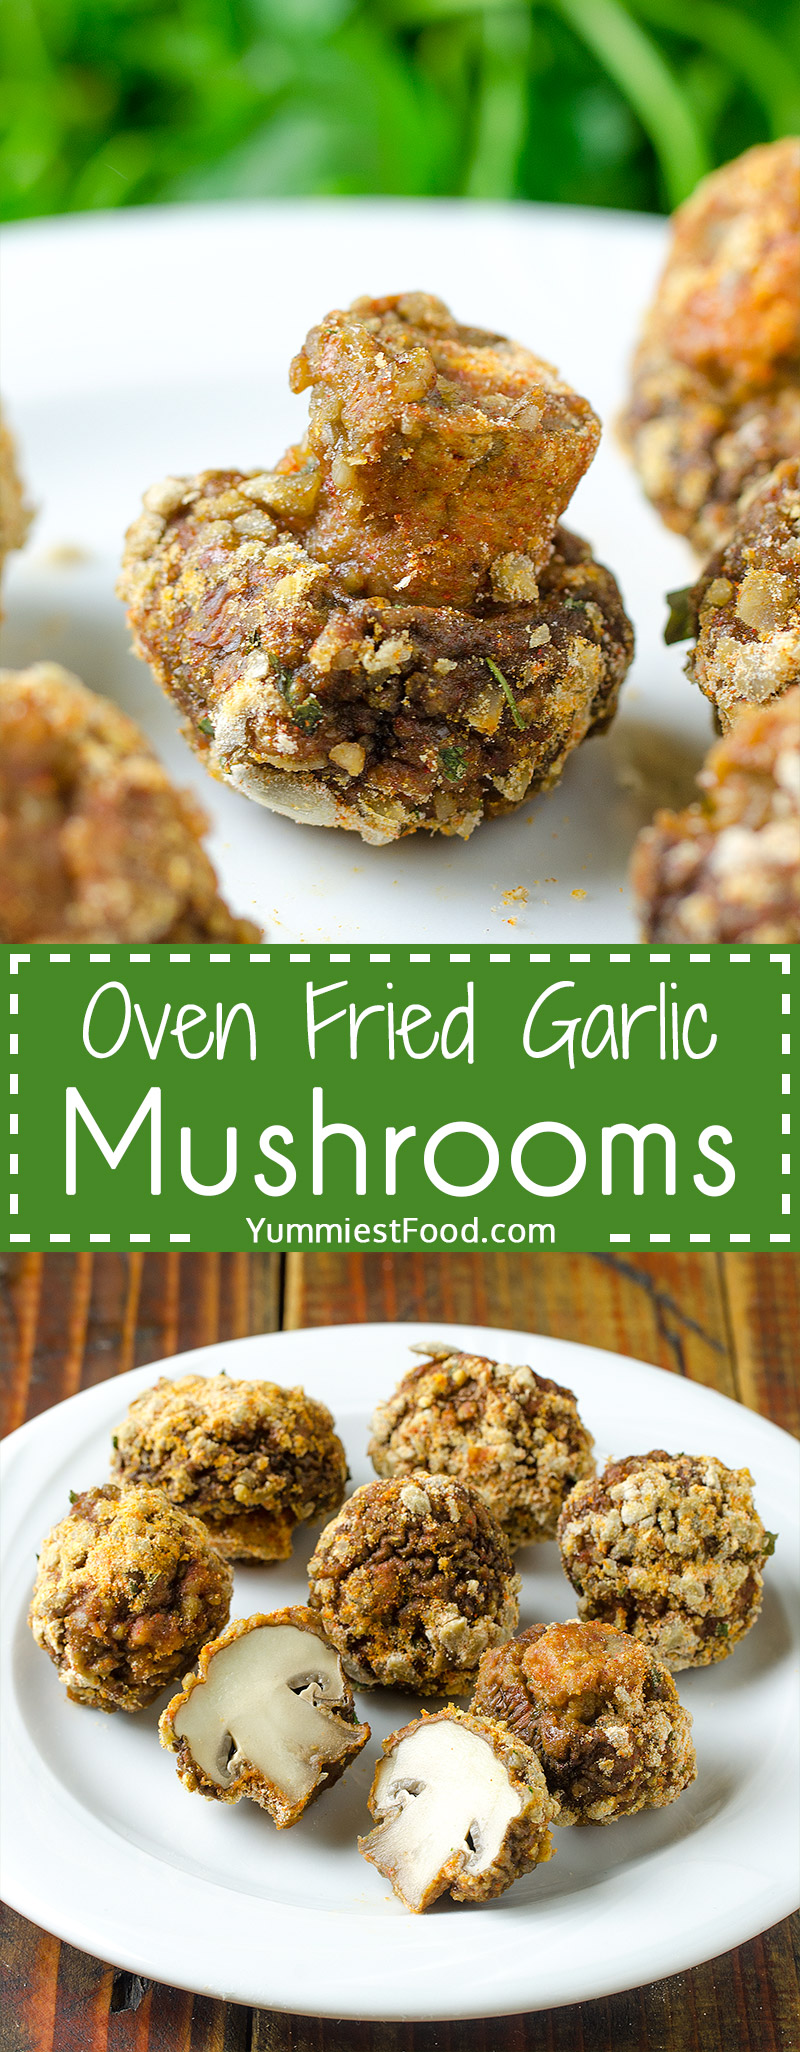 Delicious, easy and tender these Oven Fried Garlic Mushrooms are a perfect healthy side dish that take under 25 minutes to make